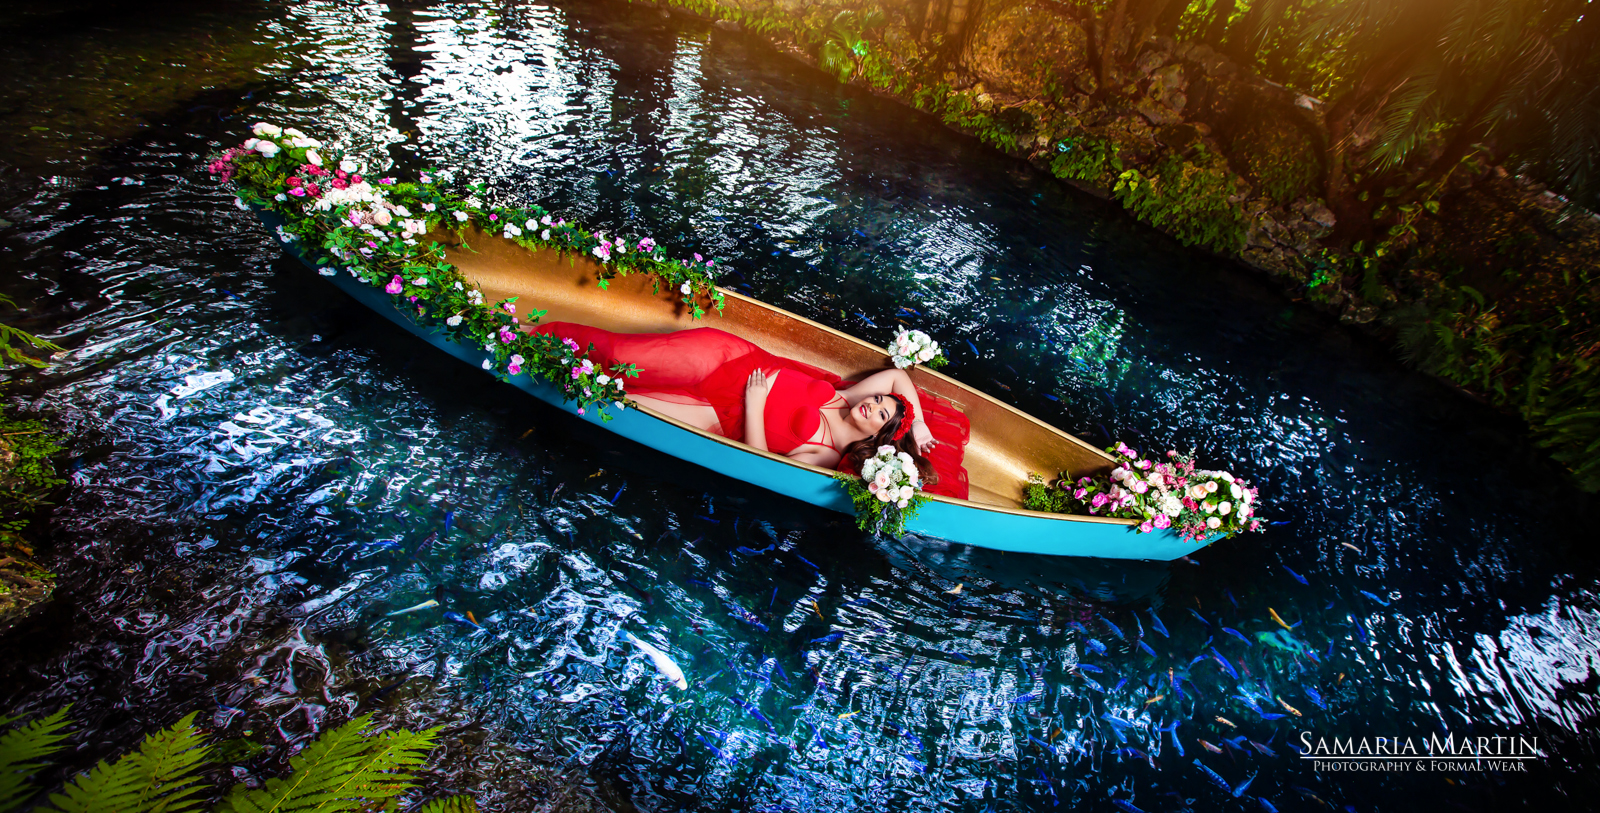 Quinceanera with flowers, quinceanera photoshoot in a lake, 15 photoshoot with flowers, Samaria Martin Photography3